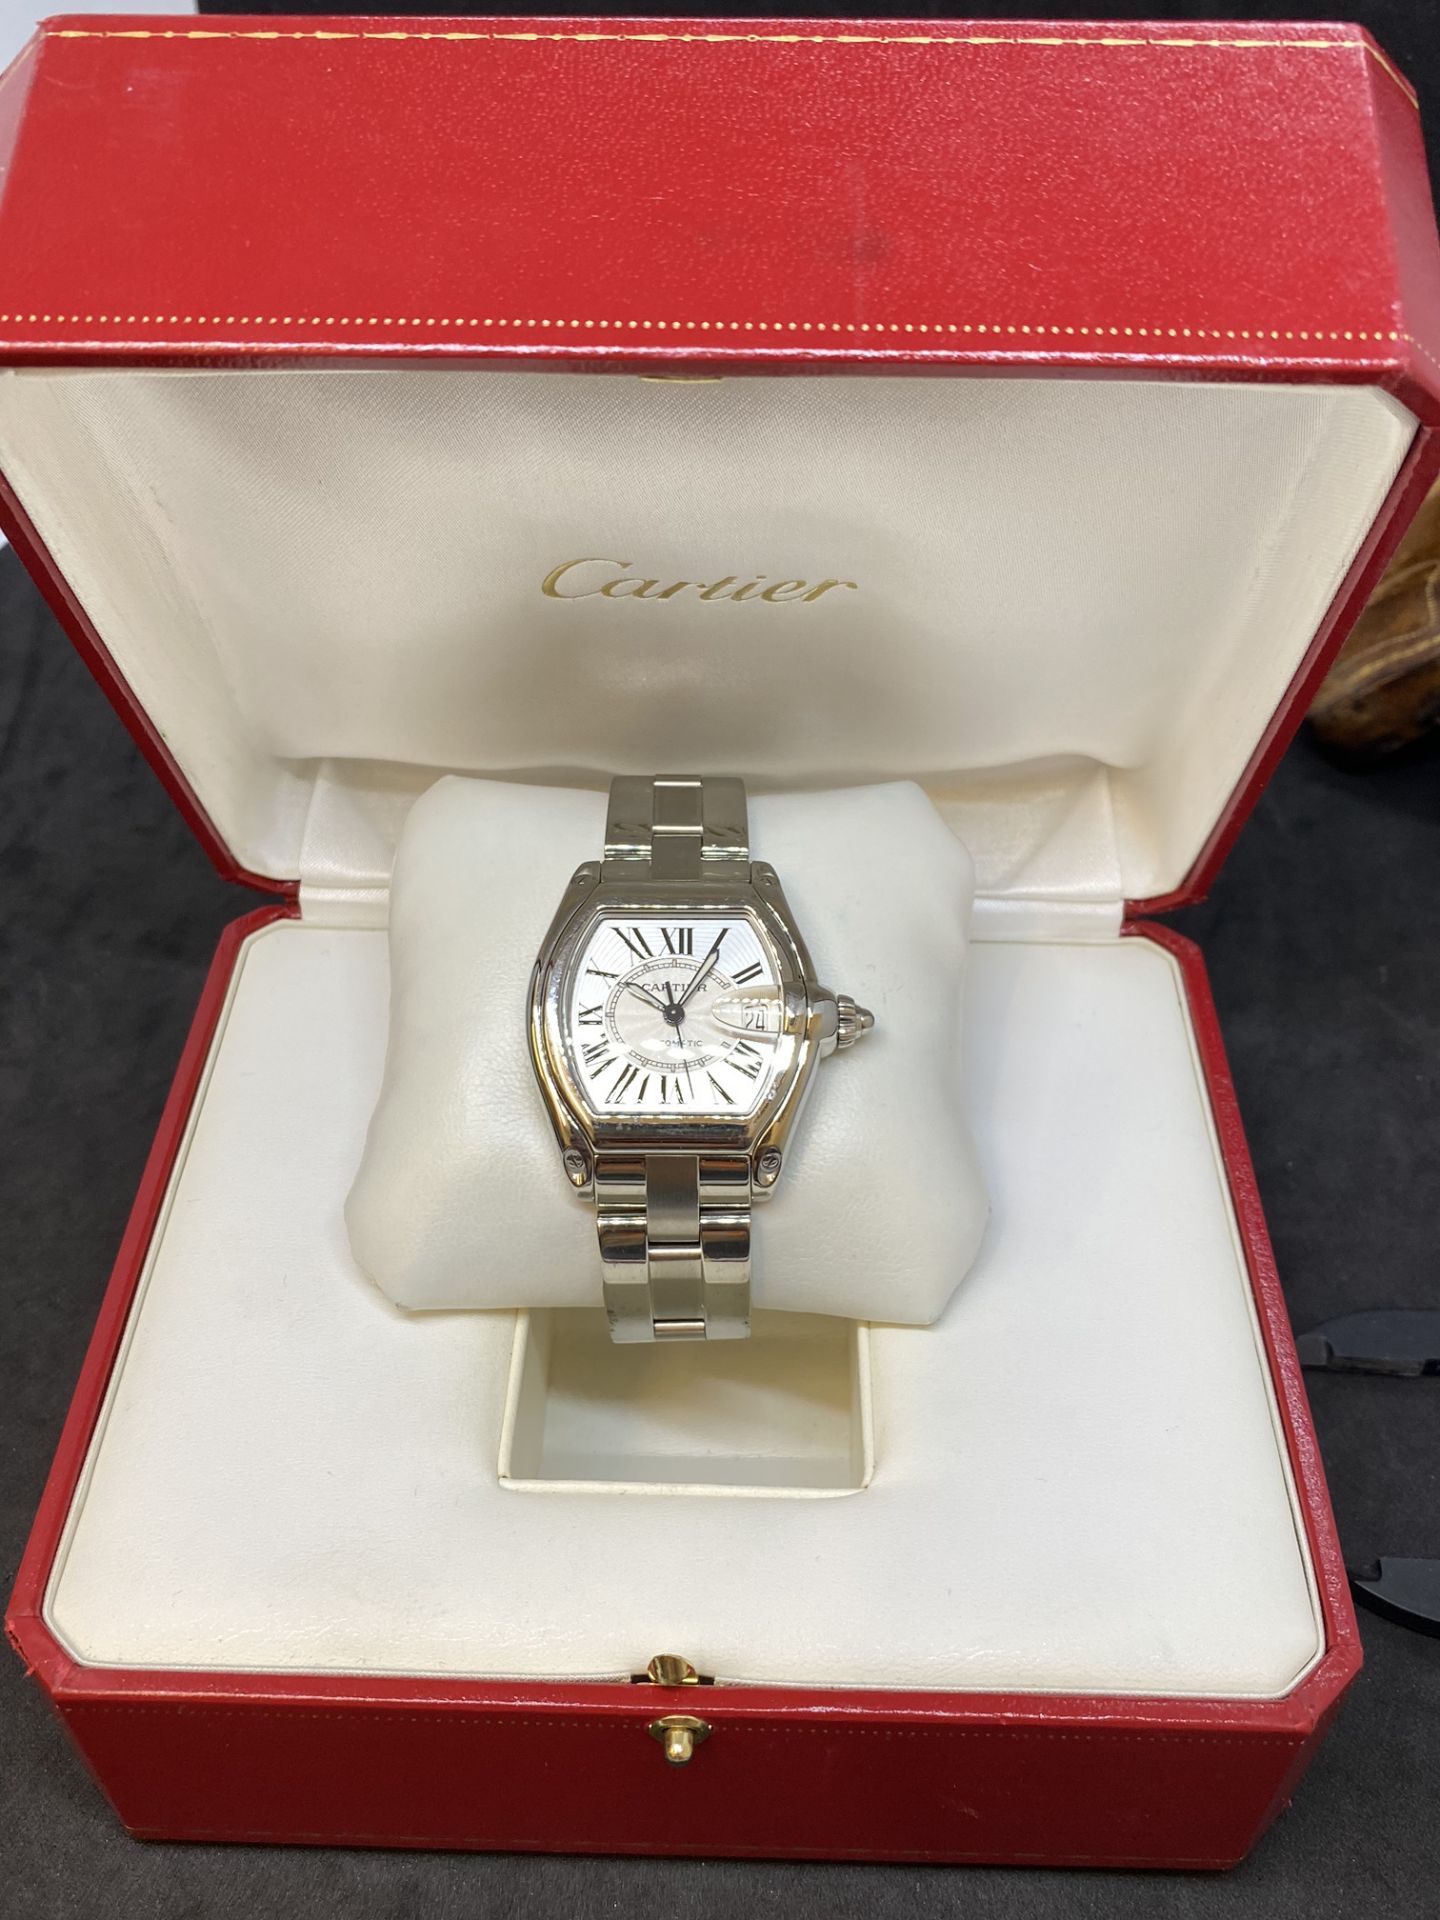 STAINLESS STEEL CARTIER ROADSTER AUTOMATIC WATCH WITH BOX